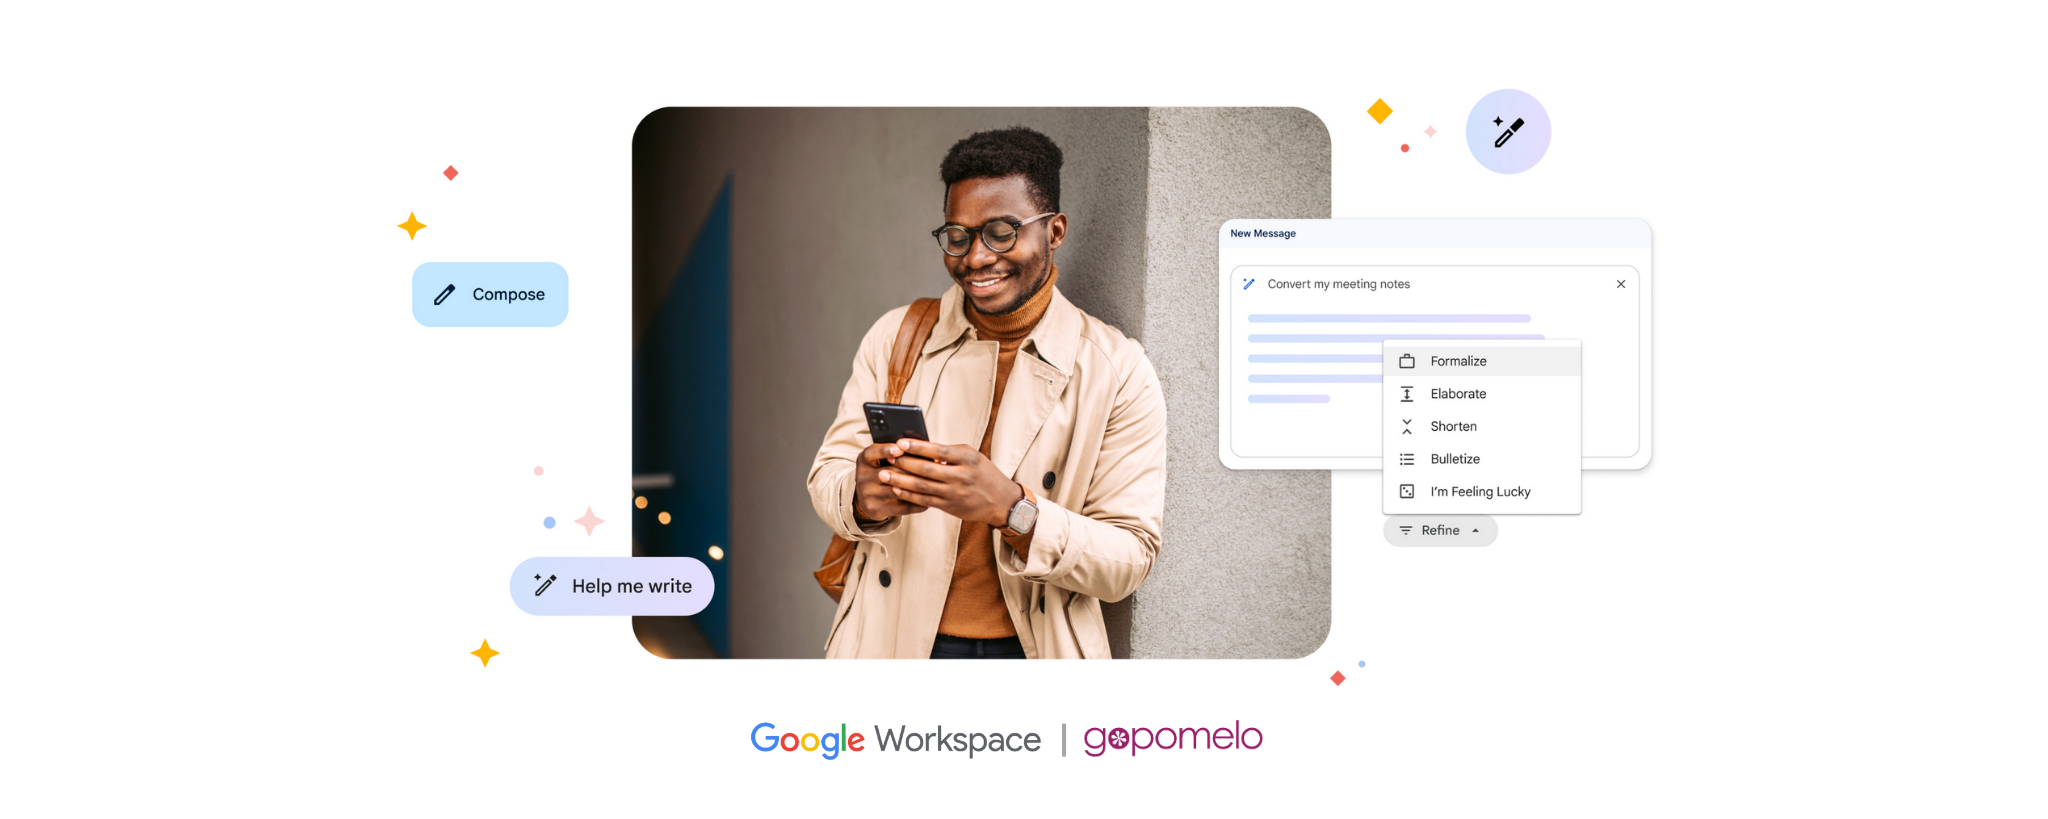 Harness the Power of Generative AI to Google Workspace | GoPomelo